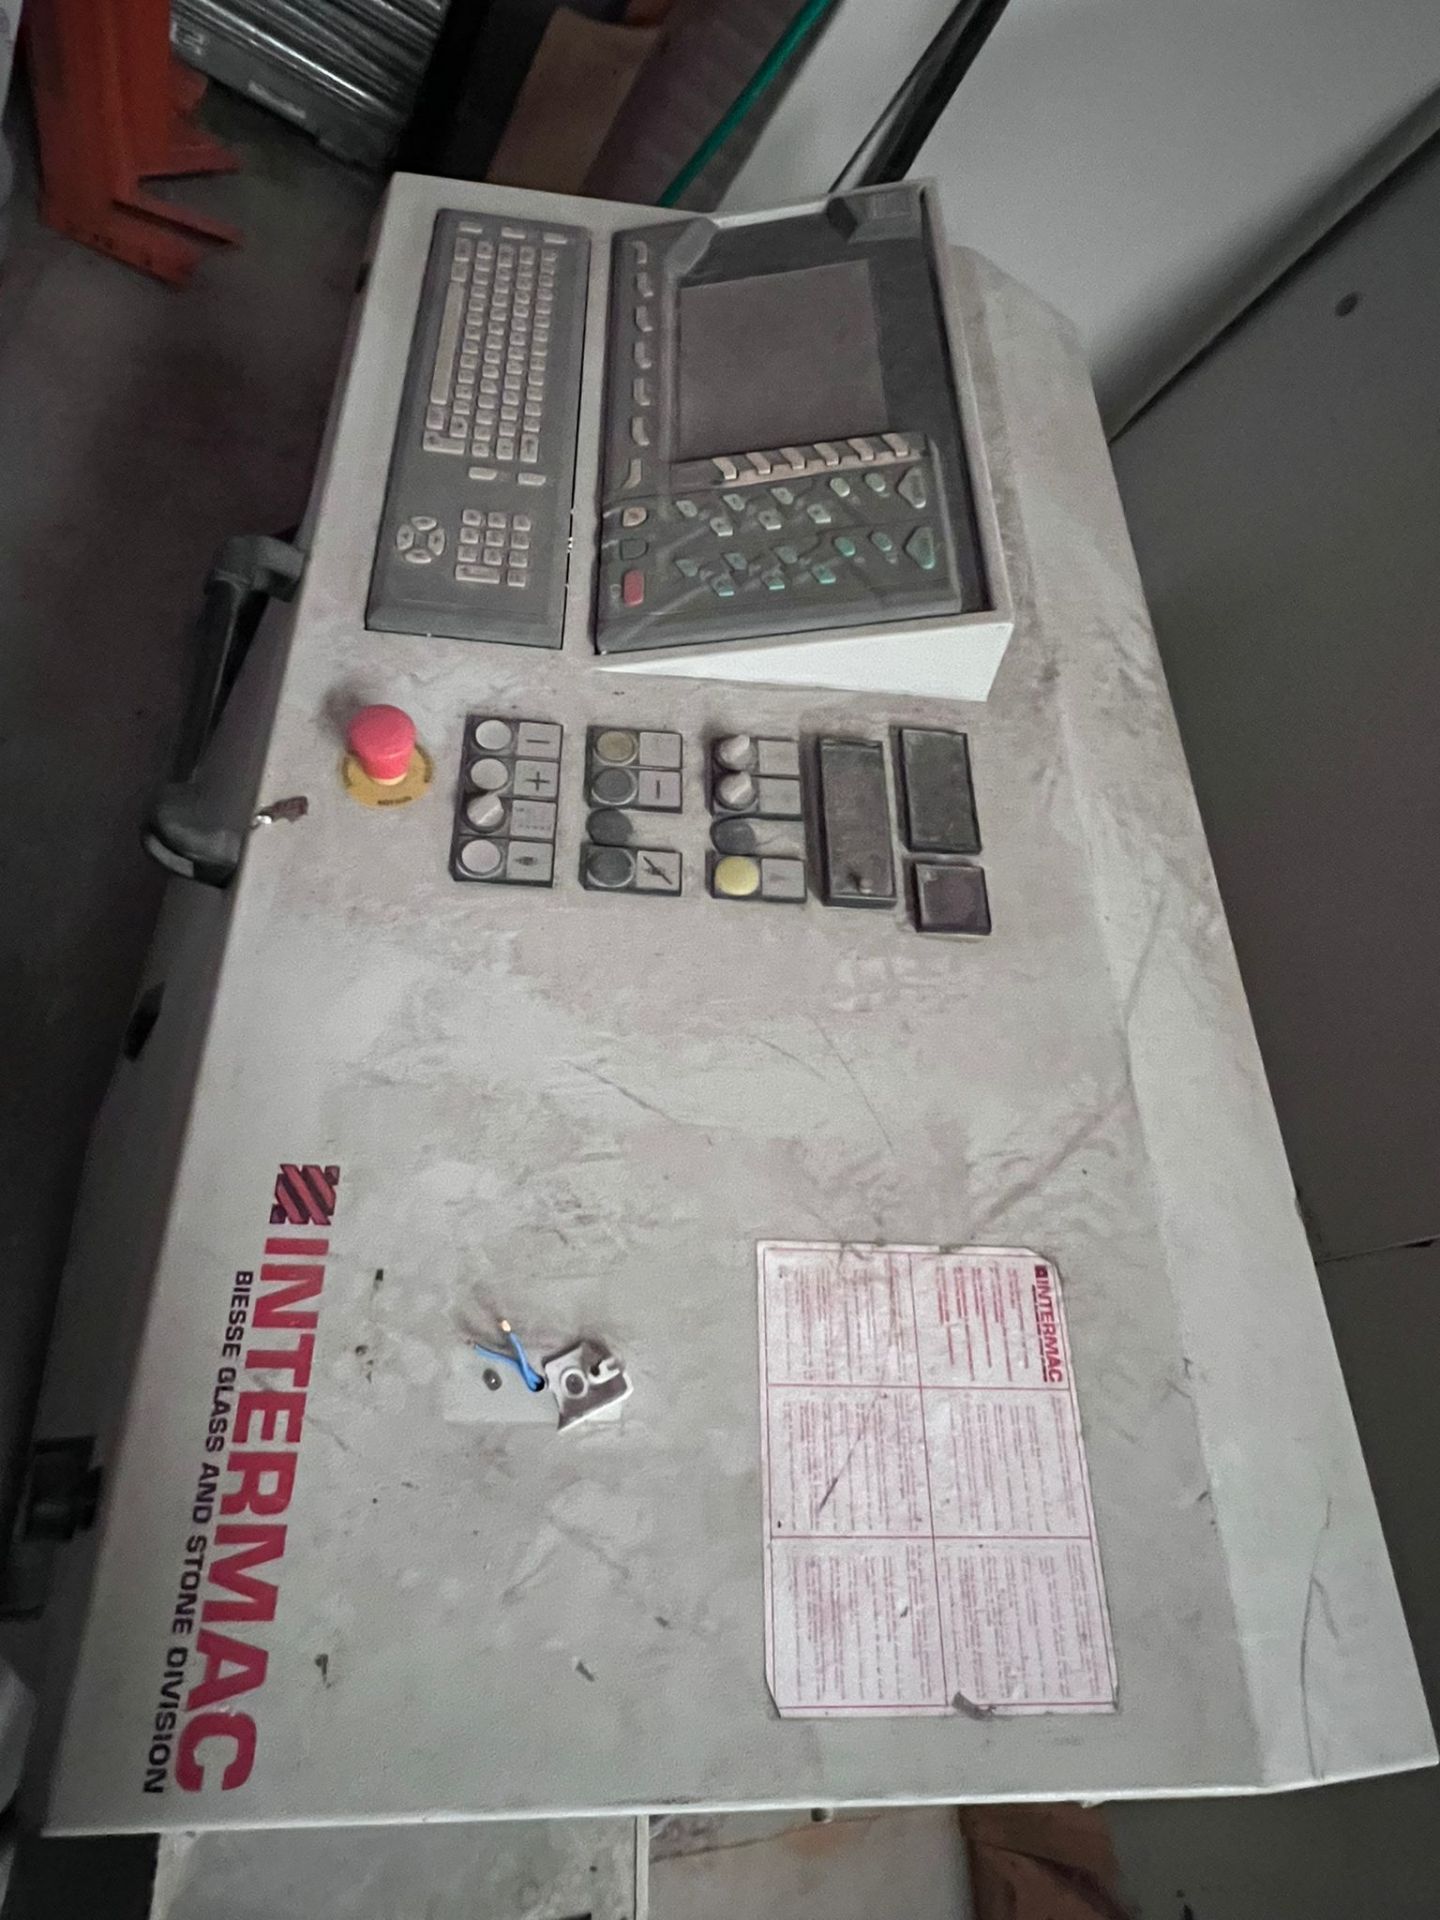 Special 5% Buyers Premium Intermac compact stone CNC machine serial no. 90775 with a Broomwade - Bild 5 aus 9